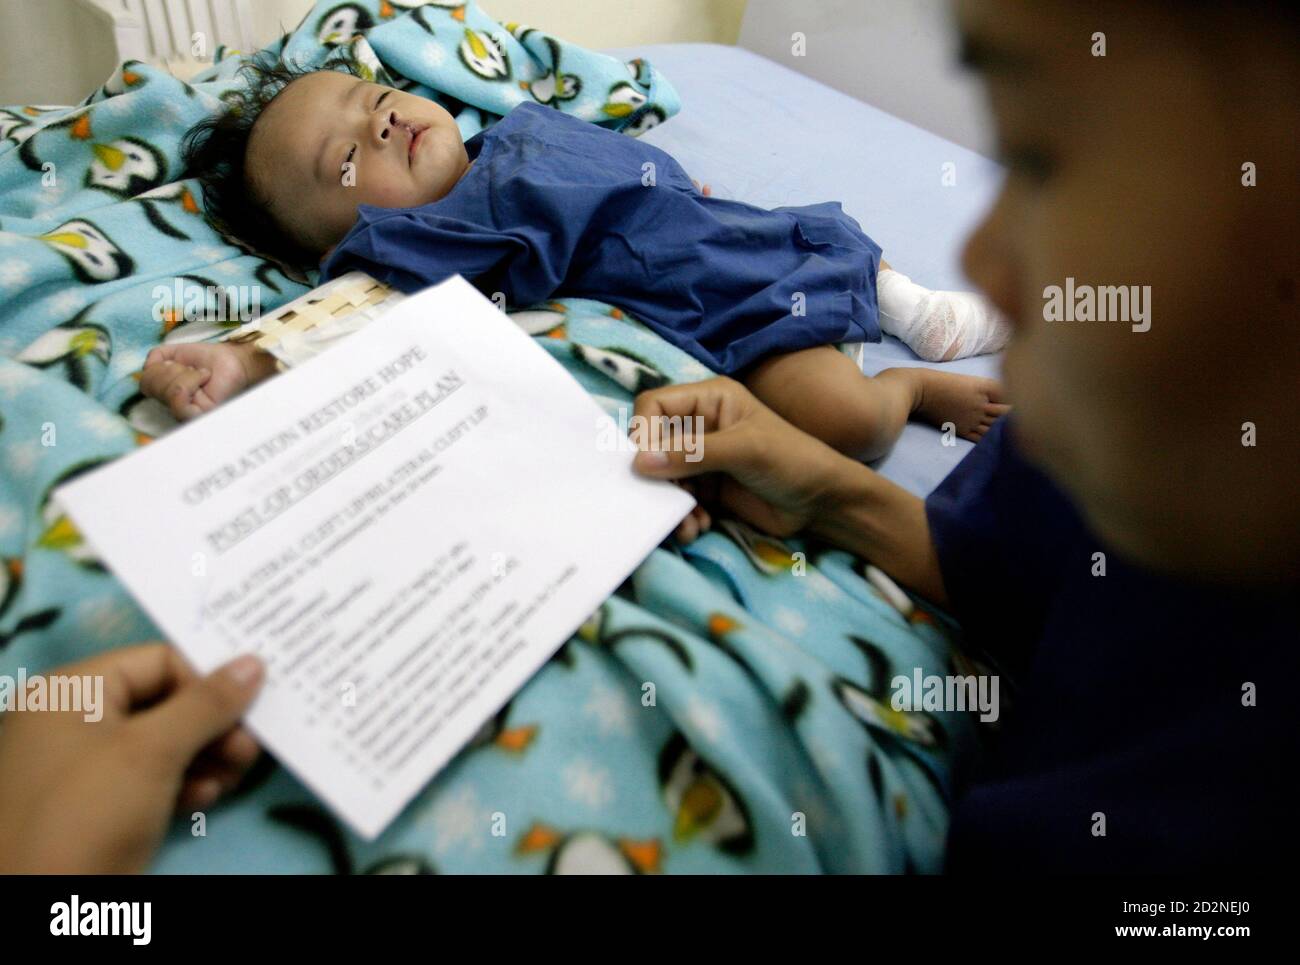 A boy, inflicted with a cleft lip, lies on a hospital bed after surgery as his mother reads the post-operation care plan during 'Operation Restore Hope' at Diosdado Macapagal Memorial Medical Center in Caloocan City, Metro Manila April 12, 2010. Operation Restore Hope, a group of medical volunteers from Germany, New Zealand and Australia who perform surgeries for underprivileged children every year, aim to provide free surgery for about 70-80 children inflicted with cleft lips, cleft palates, and other facial deformities over a period of five days. REUTERS/Cheryl Ravelo (PHILIPPINES - Tags: HE Stock Photo